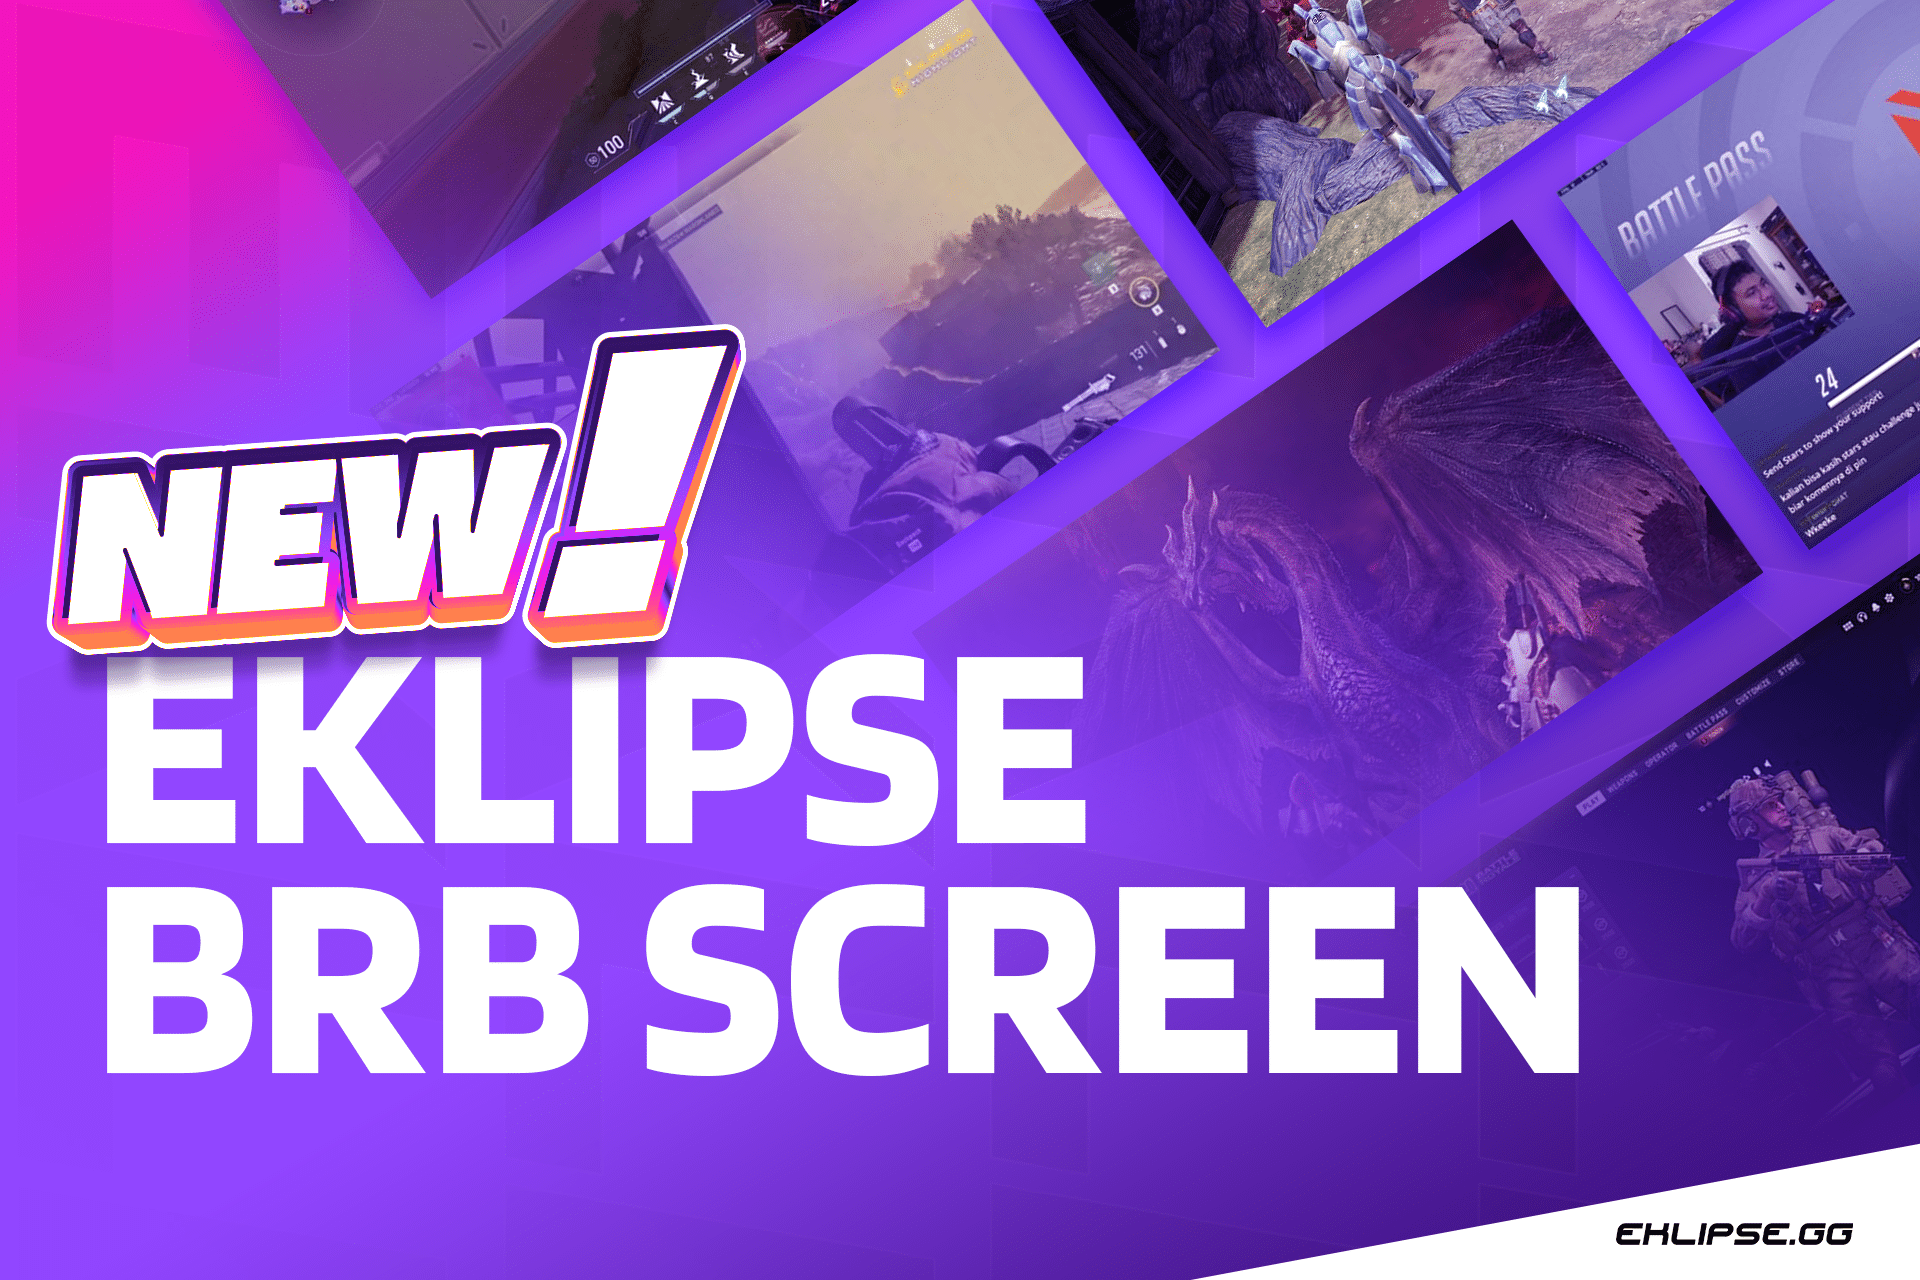 Eklipse BRB screen feature